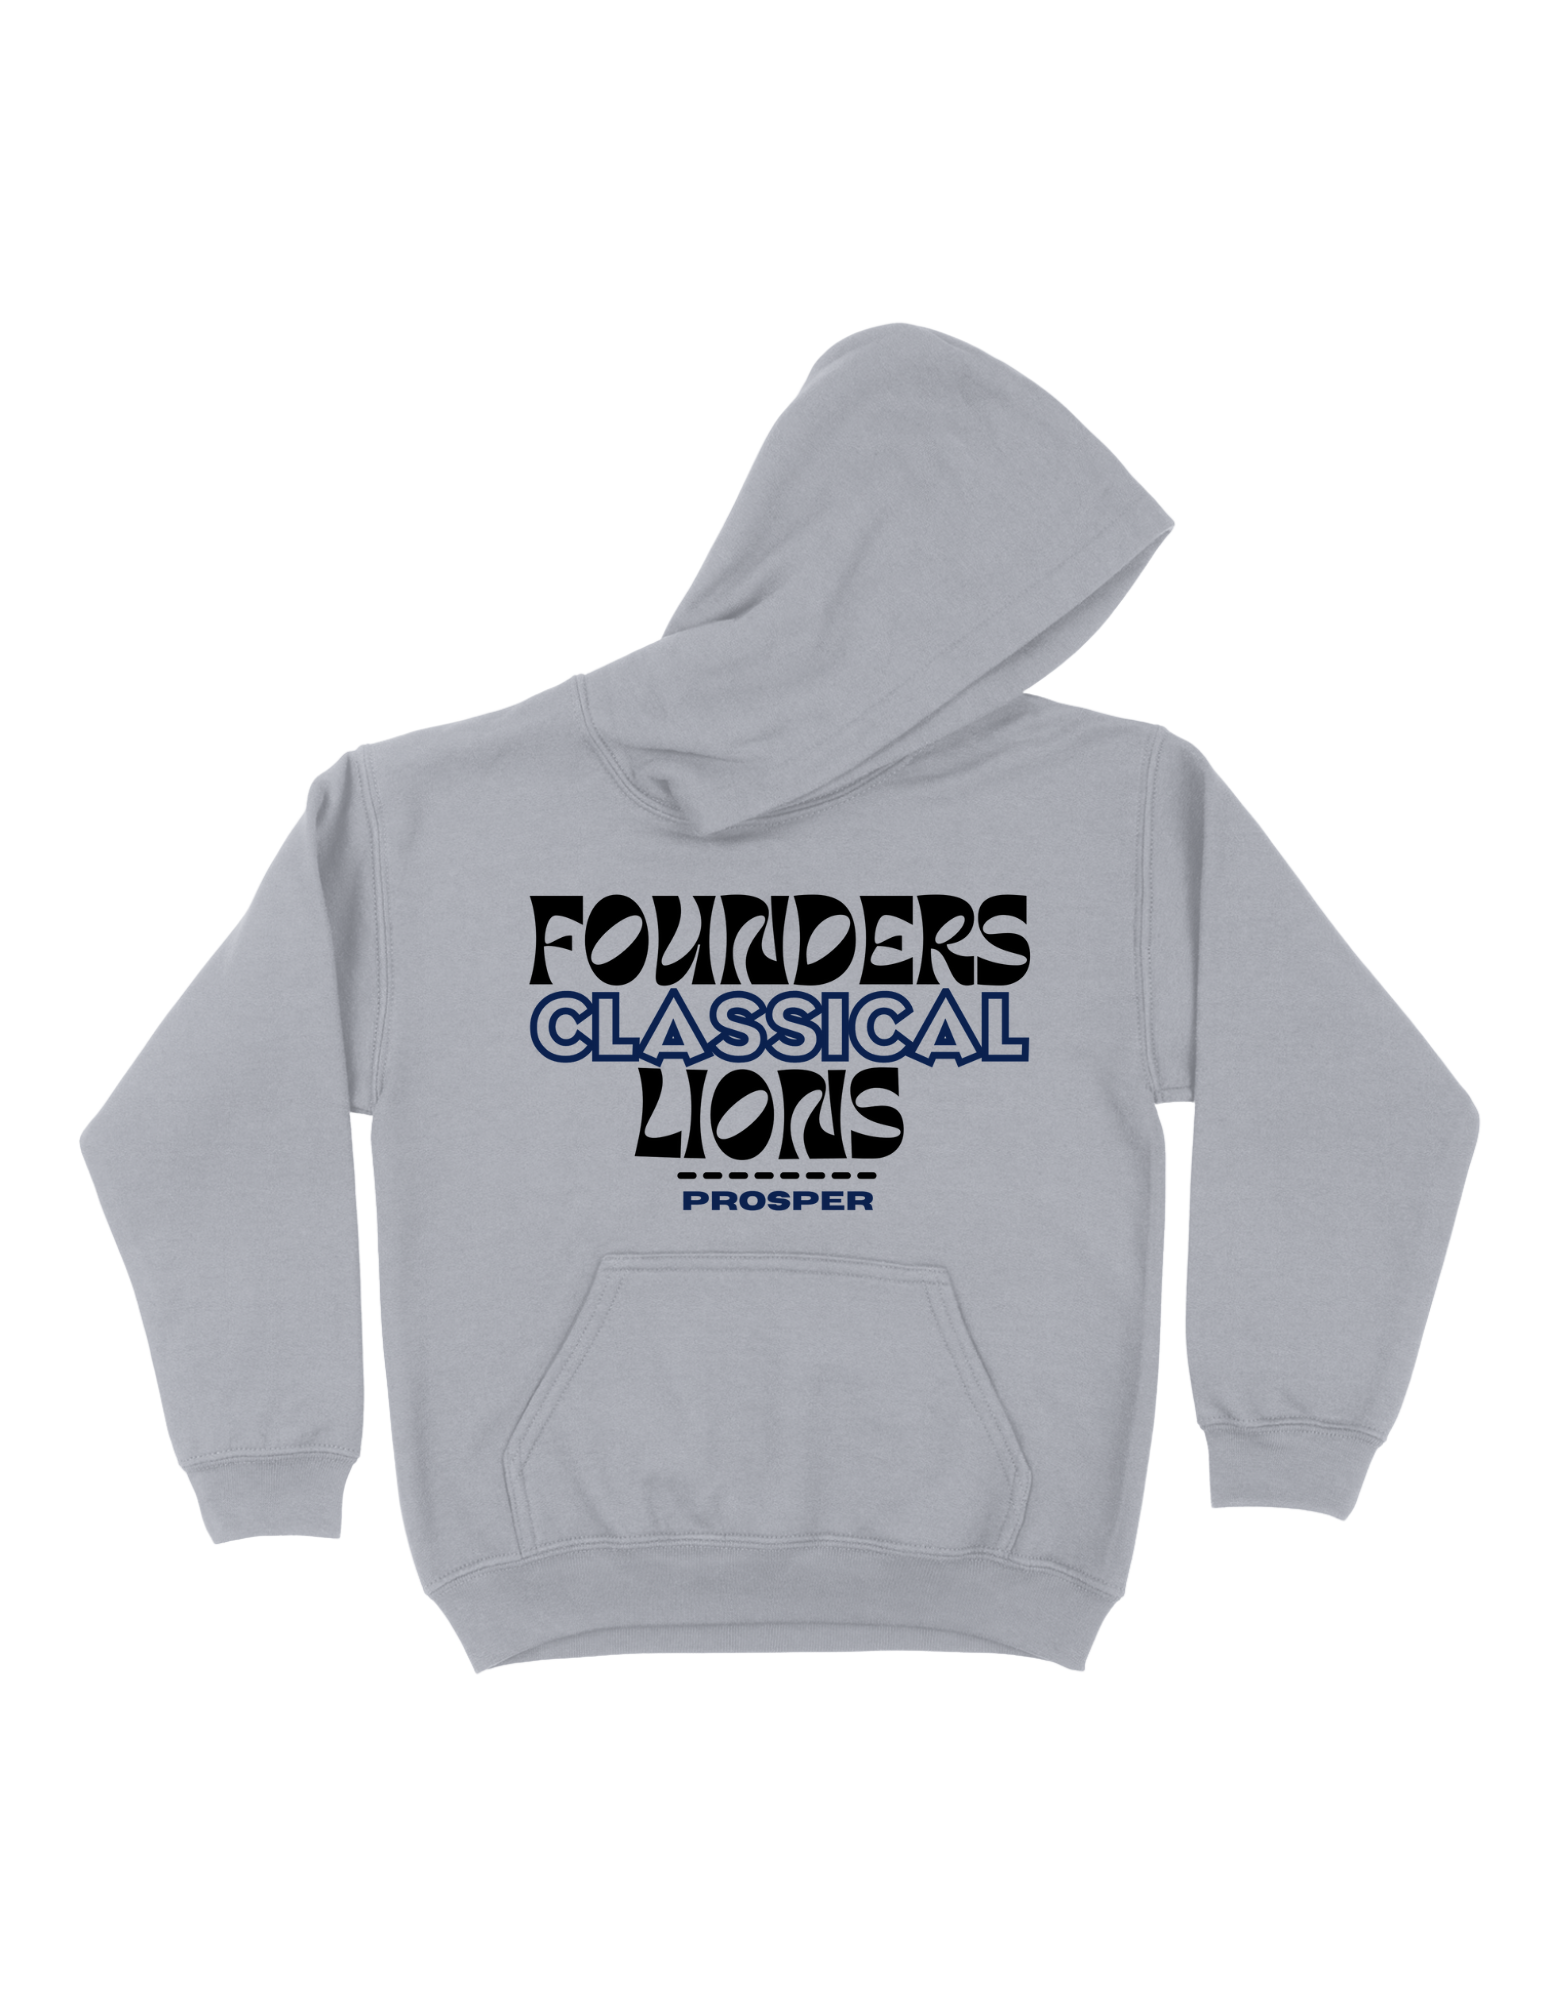 Founders Classical Lions Prosper - Sport Gray Hoodie Large Image